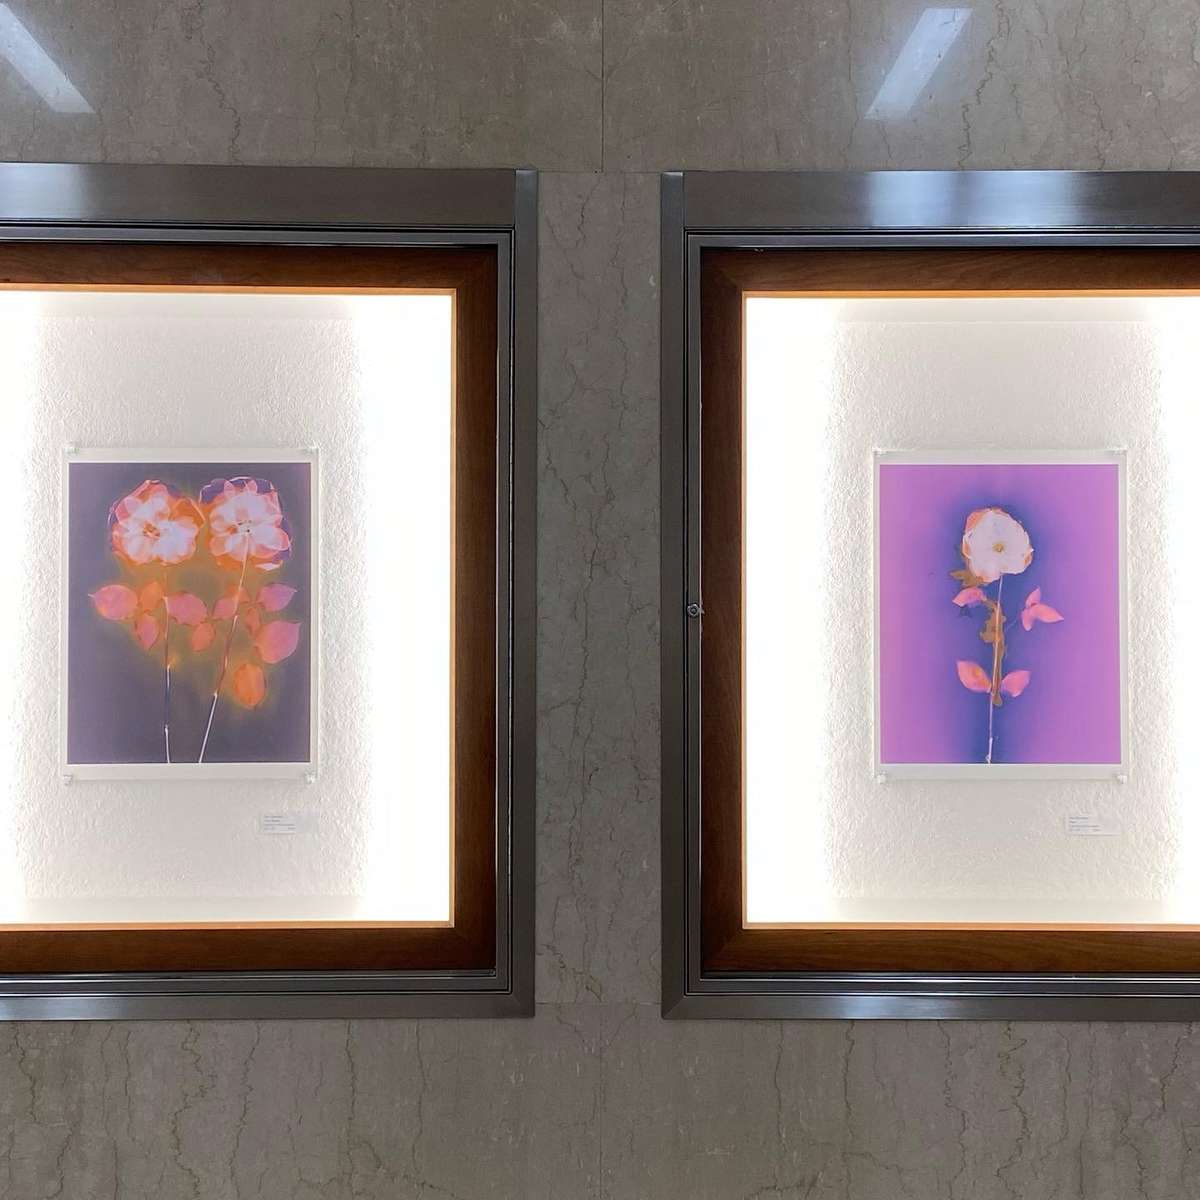 TWO ROSES and ROSE from the series In My Courtyard Vitrine installation view from Meaning Making, The Interchurch Center NYC © 2023 Ann Giordano All Rights Reserved